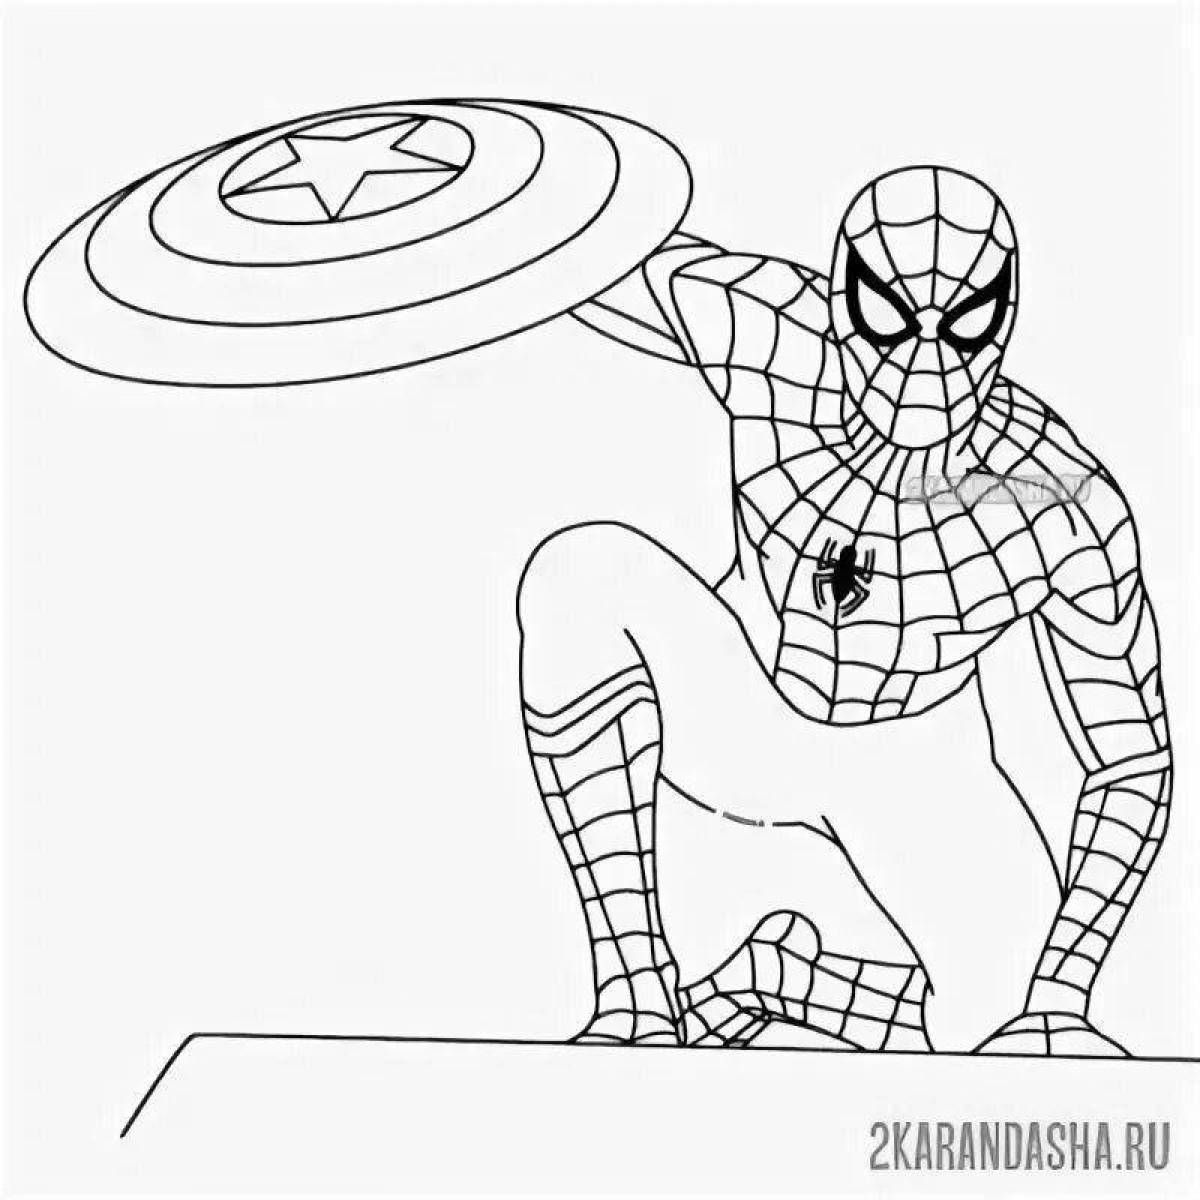 Charming spiderman with shield coloring book